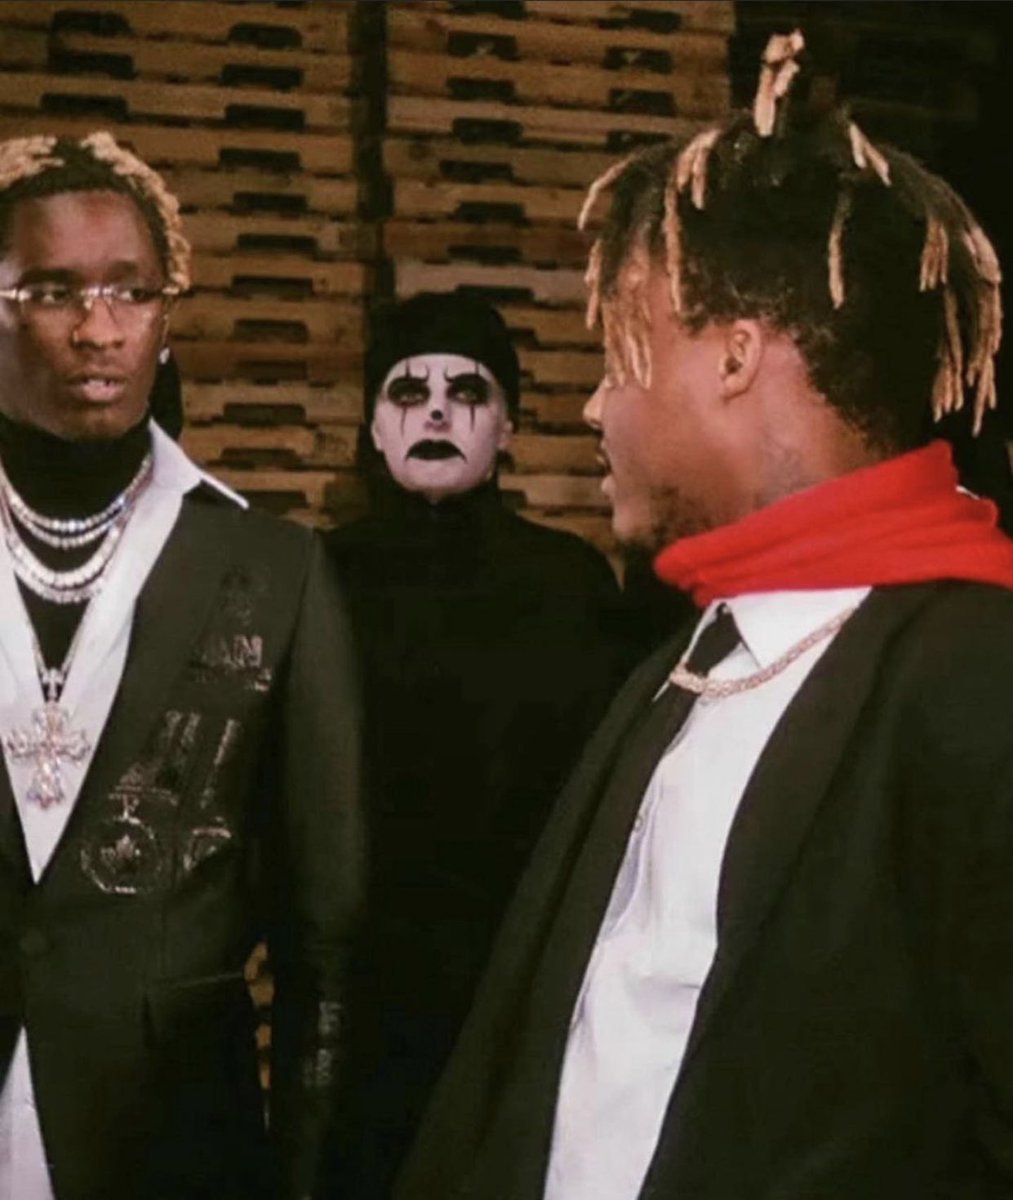 JUICE WRLD OUTFITS IN HIS MUSIC VIDEOS (Bad Boy & Conversations) 